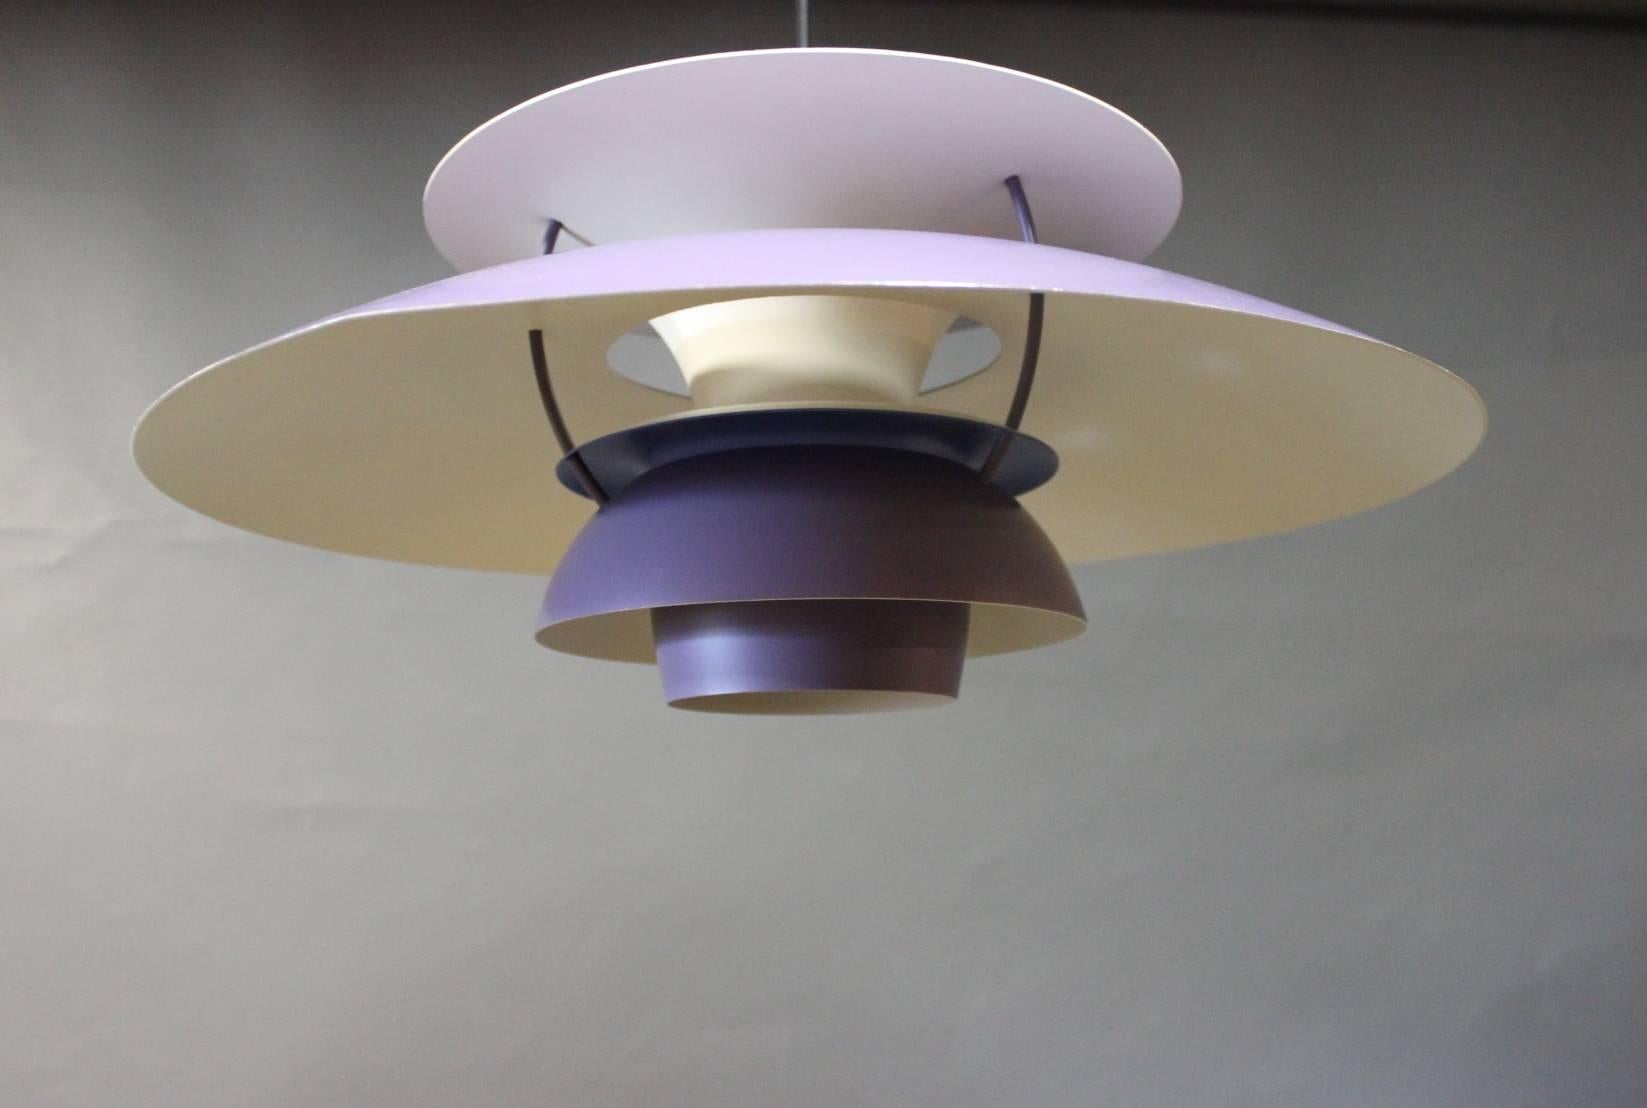 PH5 pendant designed by Poul Henningsen in 1958 and manufactured by Louis Poulsen in the 20th Century. The pendant has purple lacquered metal shades.